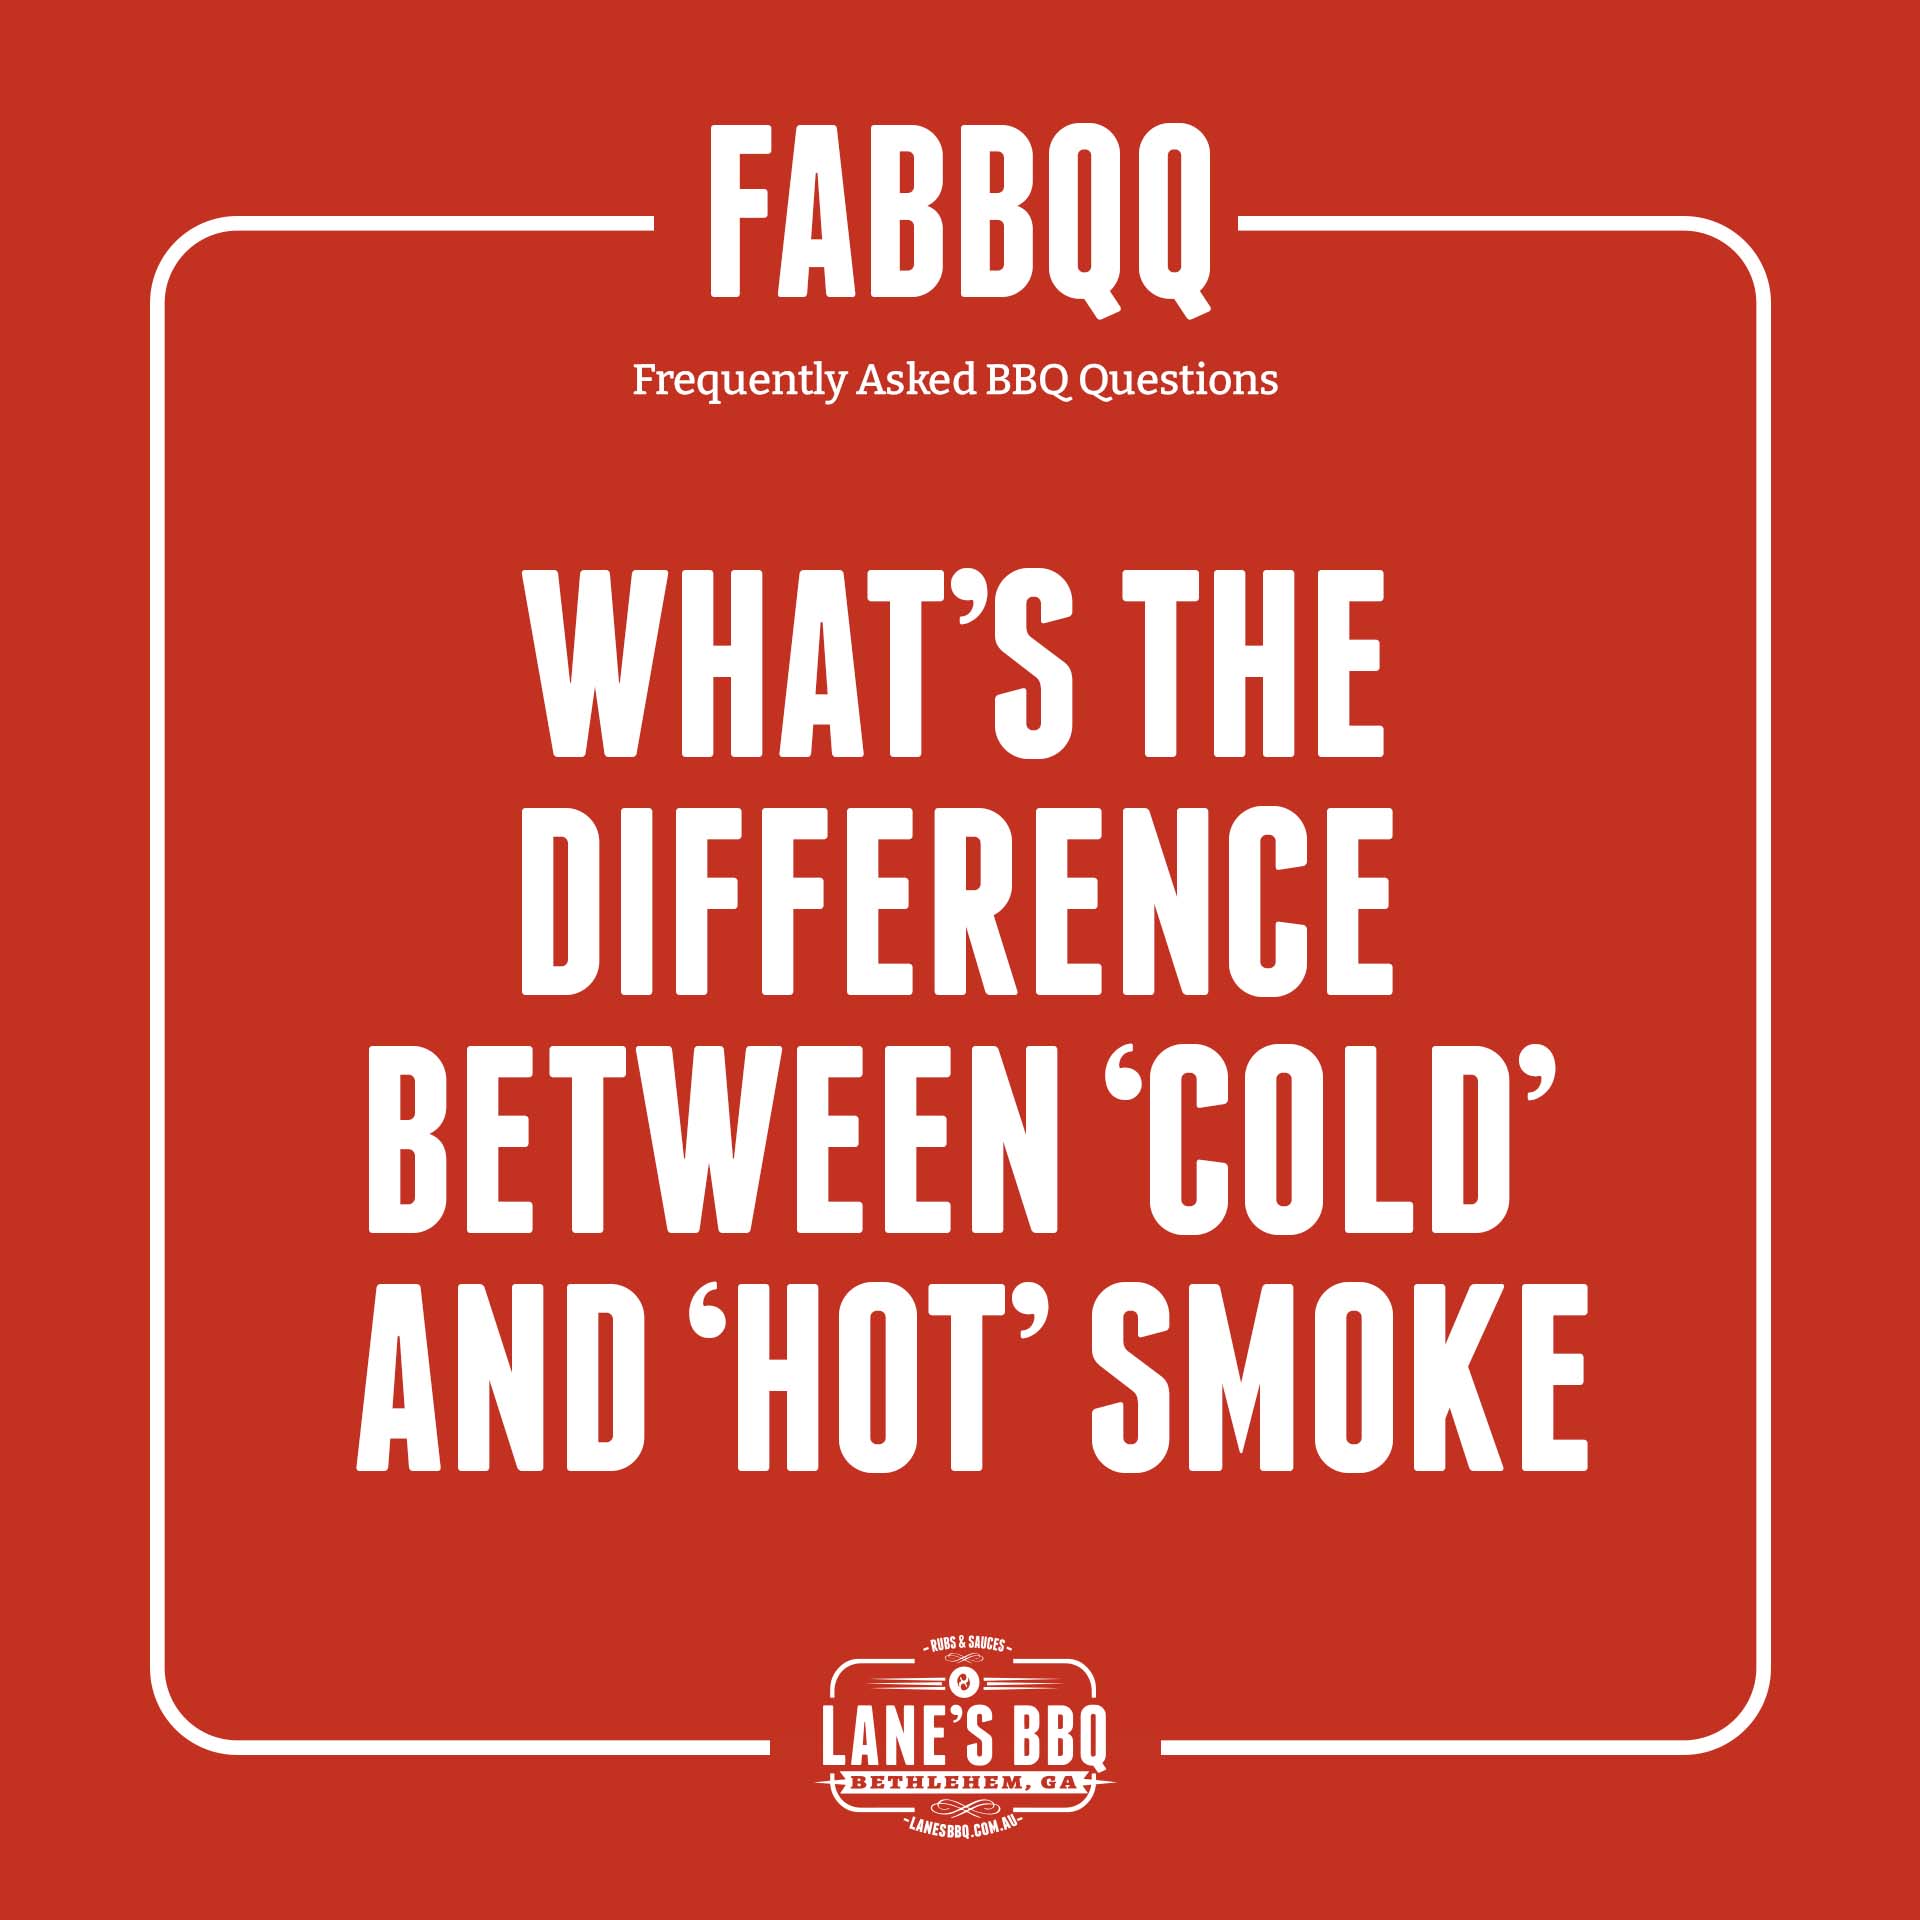 What's The Difference Between Between 'Cold' and 'Hot' Smoke?